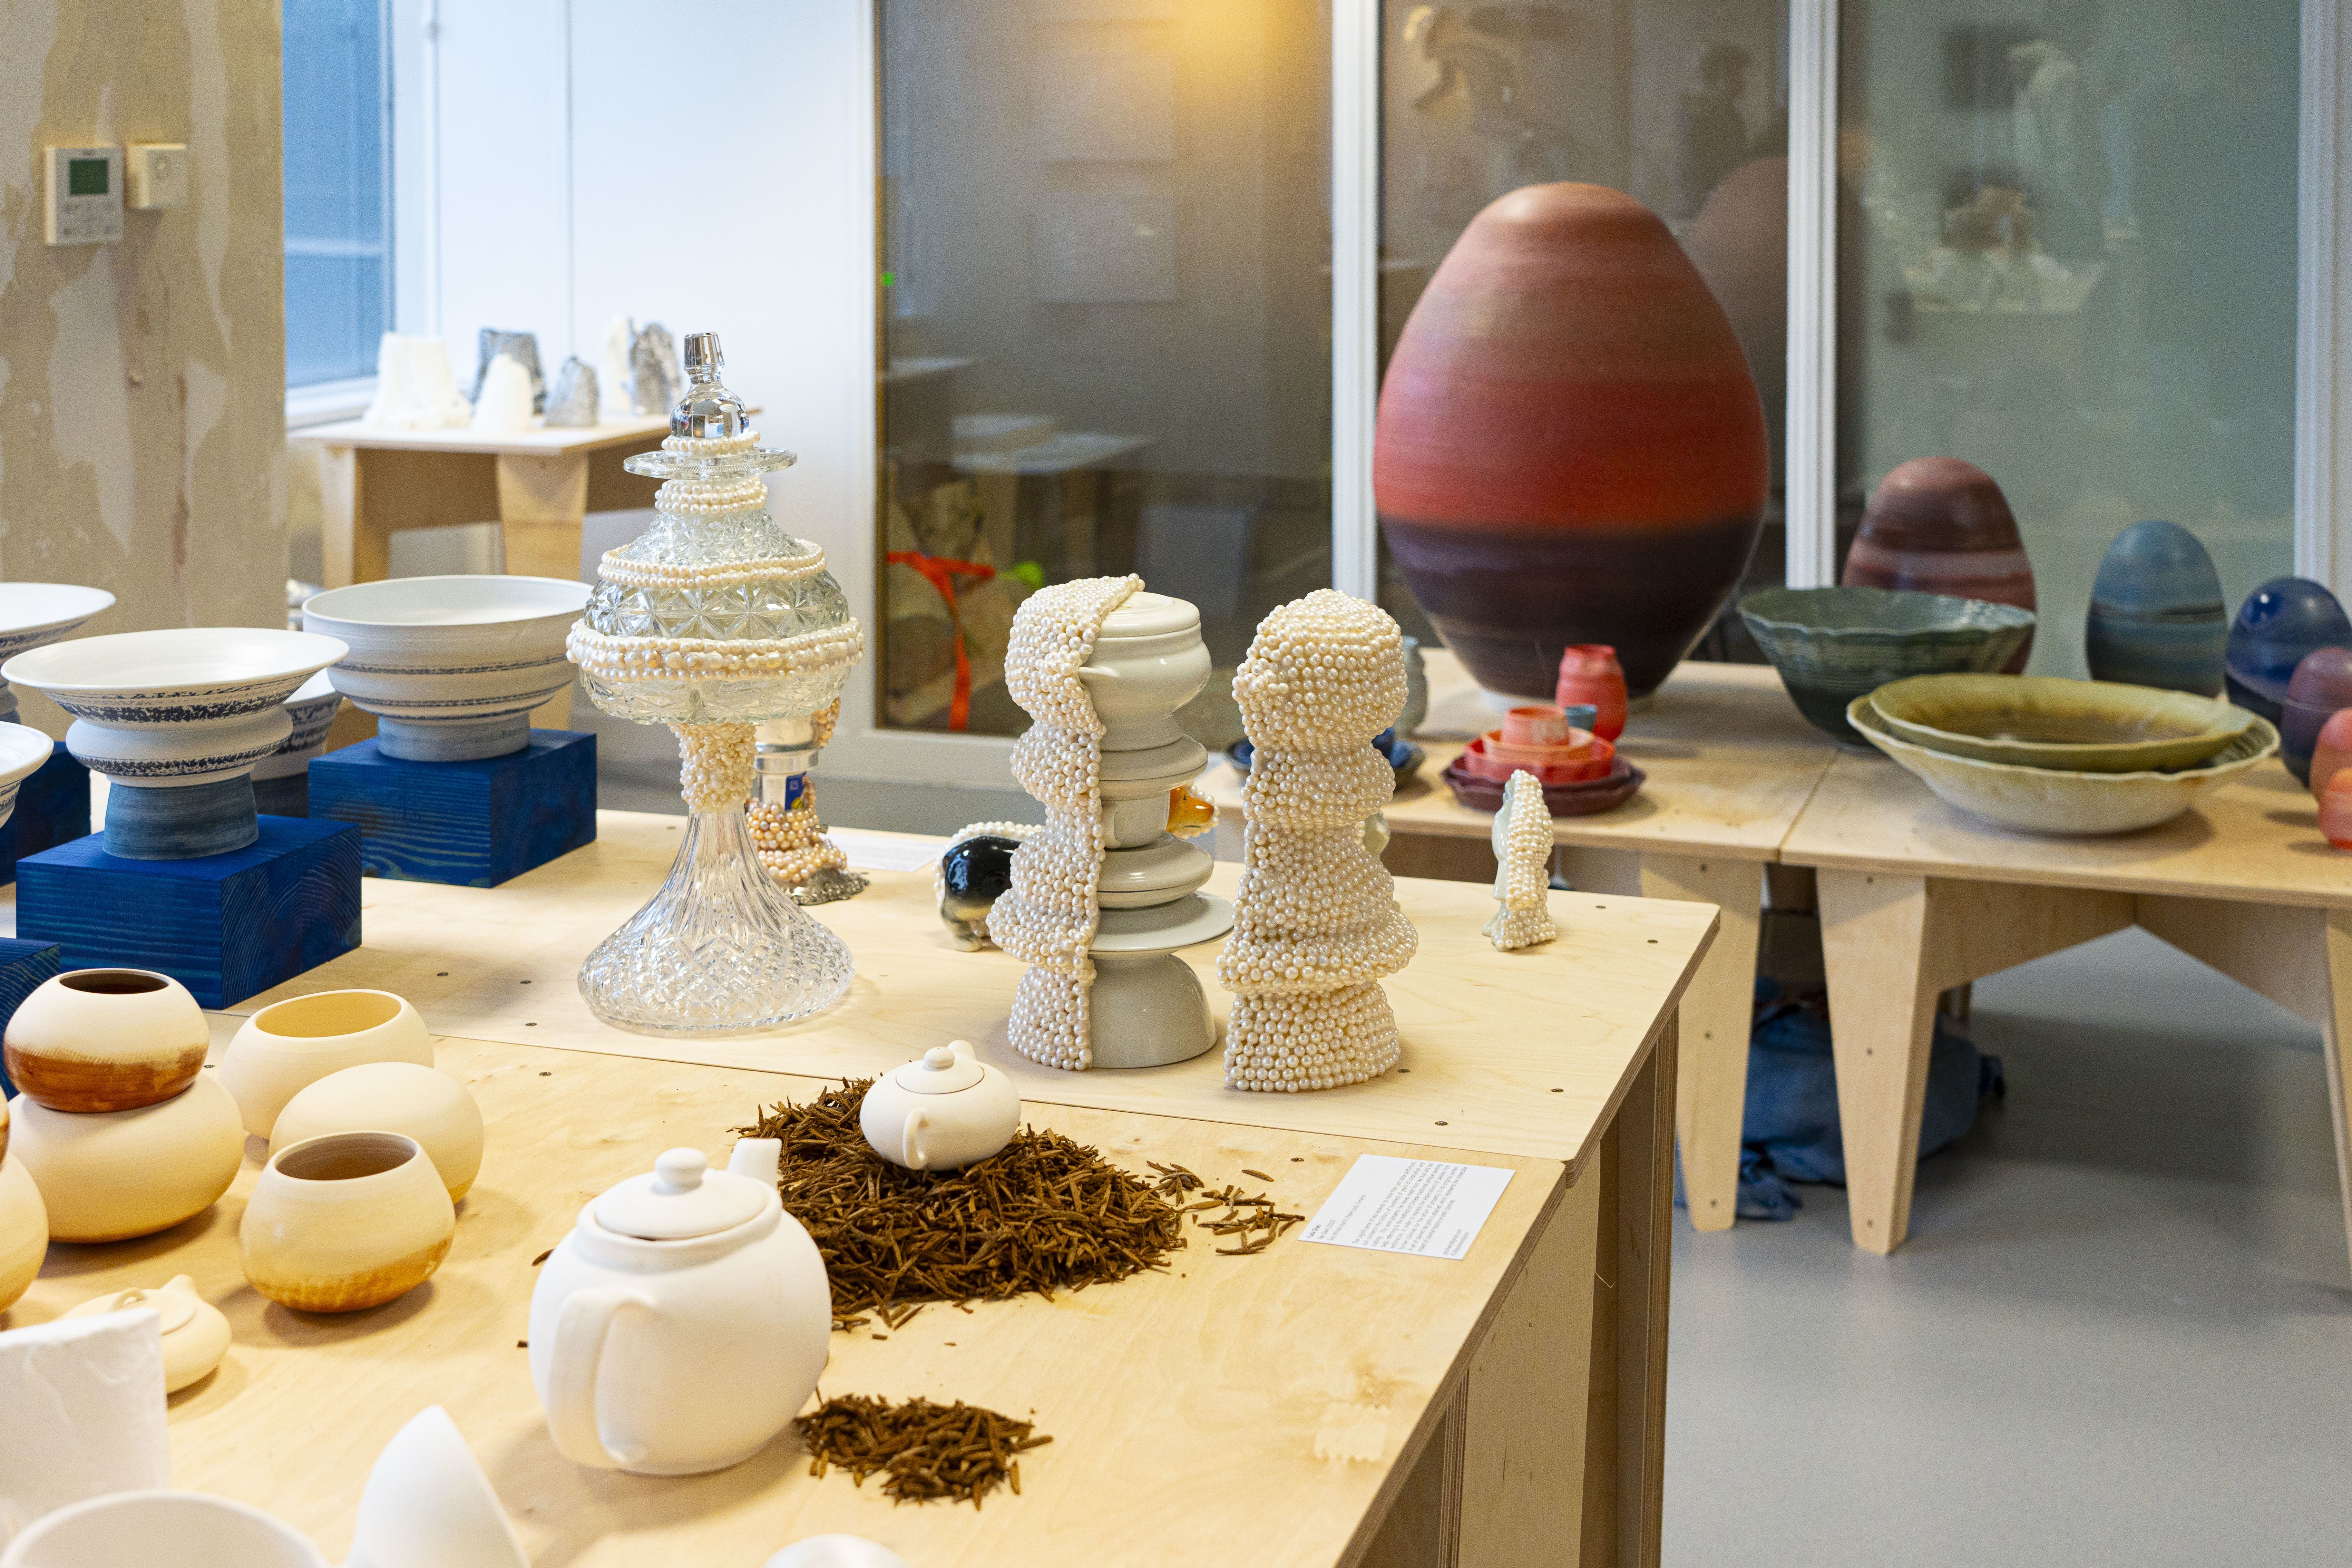 A shot of various ceramic artworks laid out on multiple tables